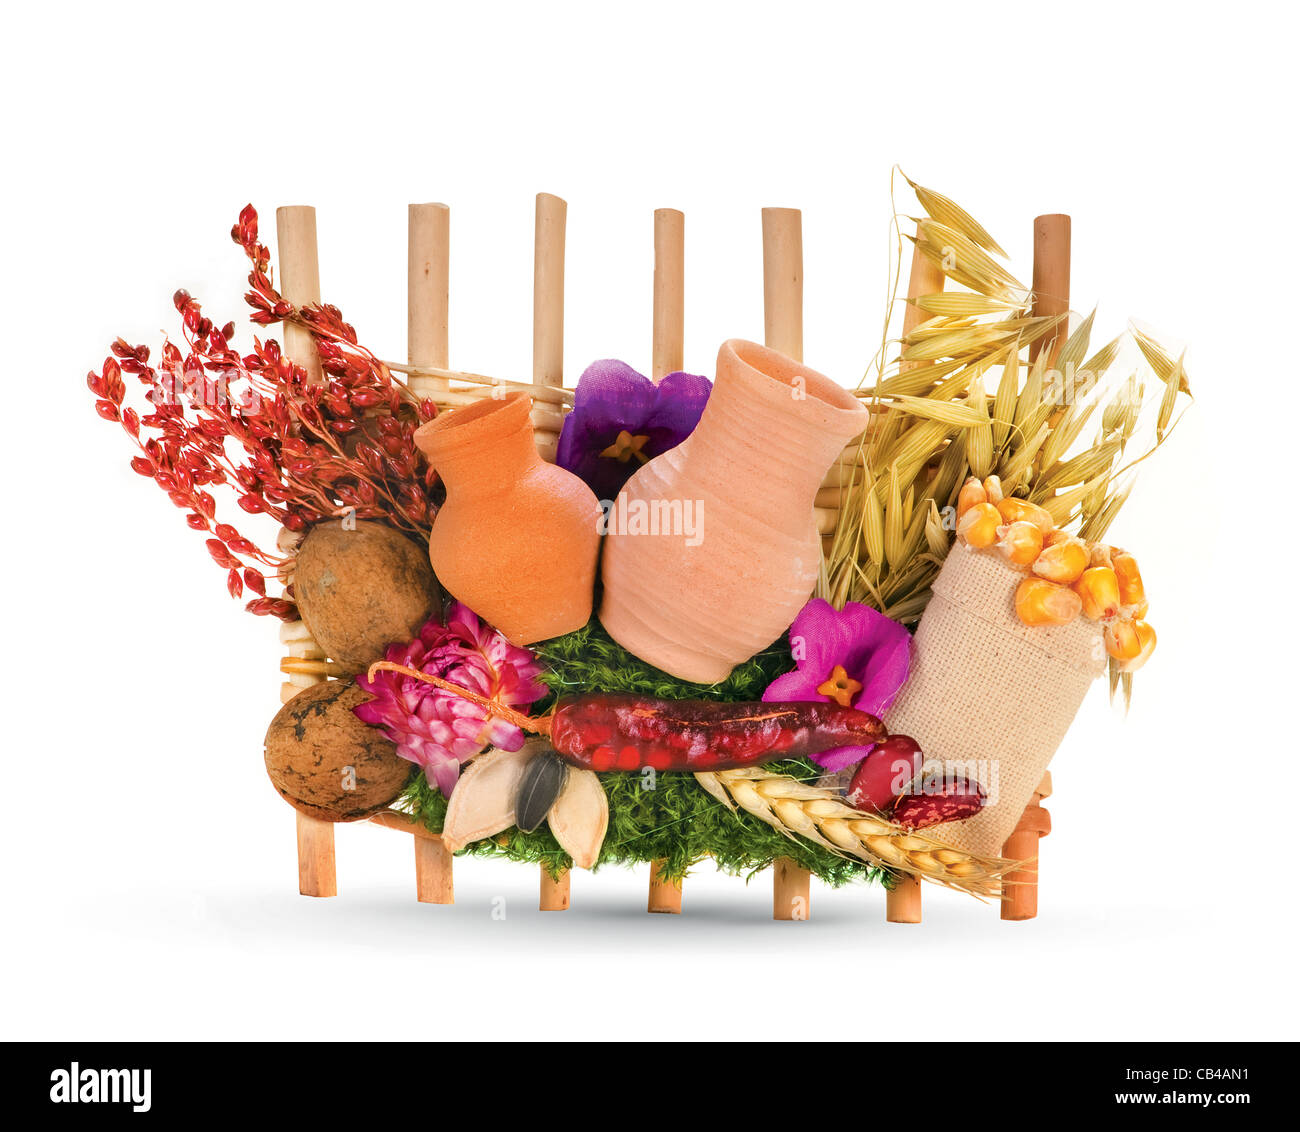 Ukrainian souvenir that made of dried materials and plants Stock Photo